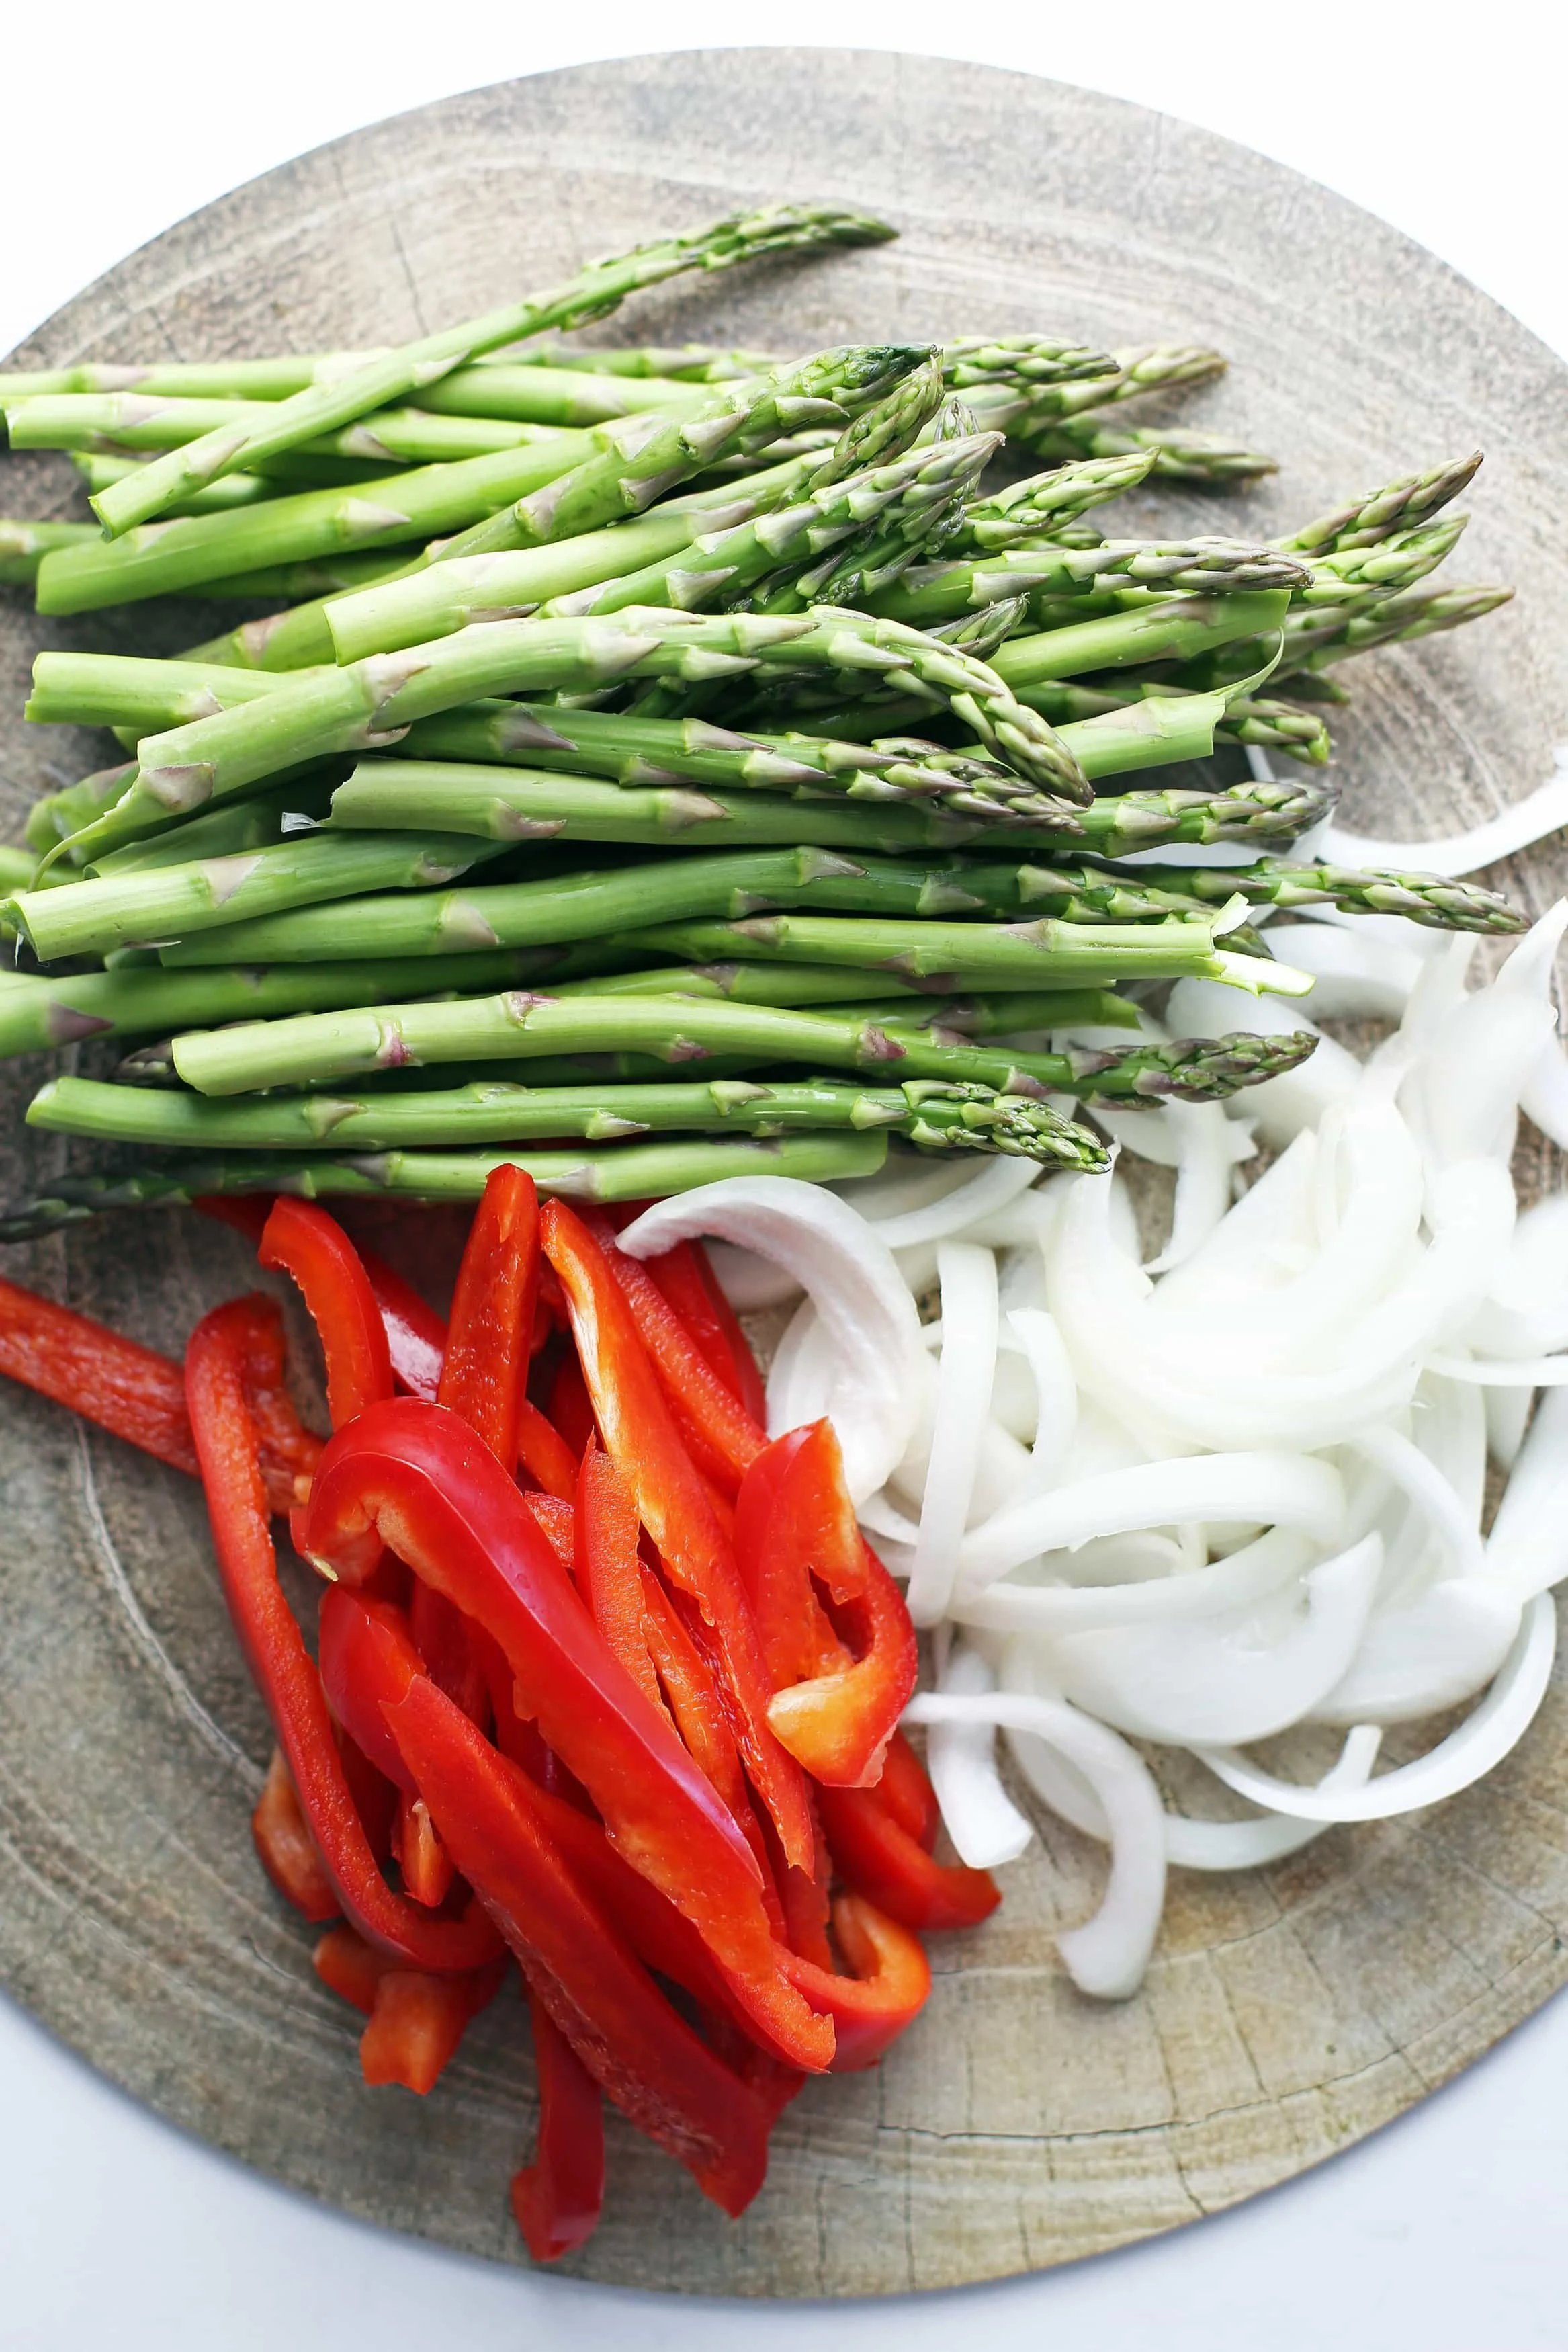 Sliced red bell pepper, sliced white onion, and trimmed asparagus on a round wooden platter.